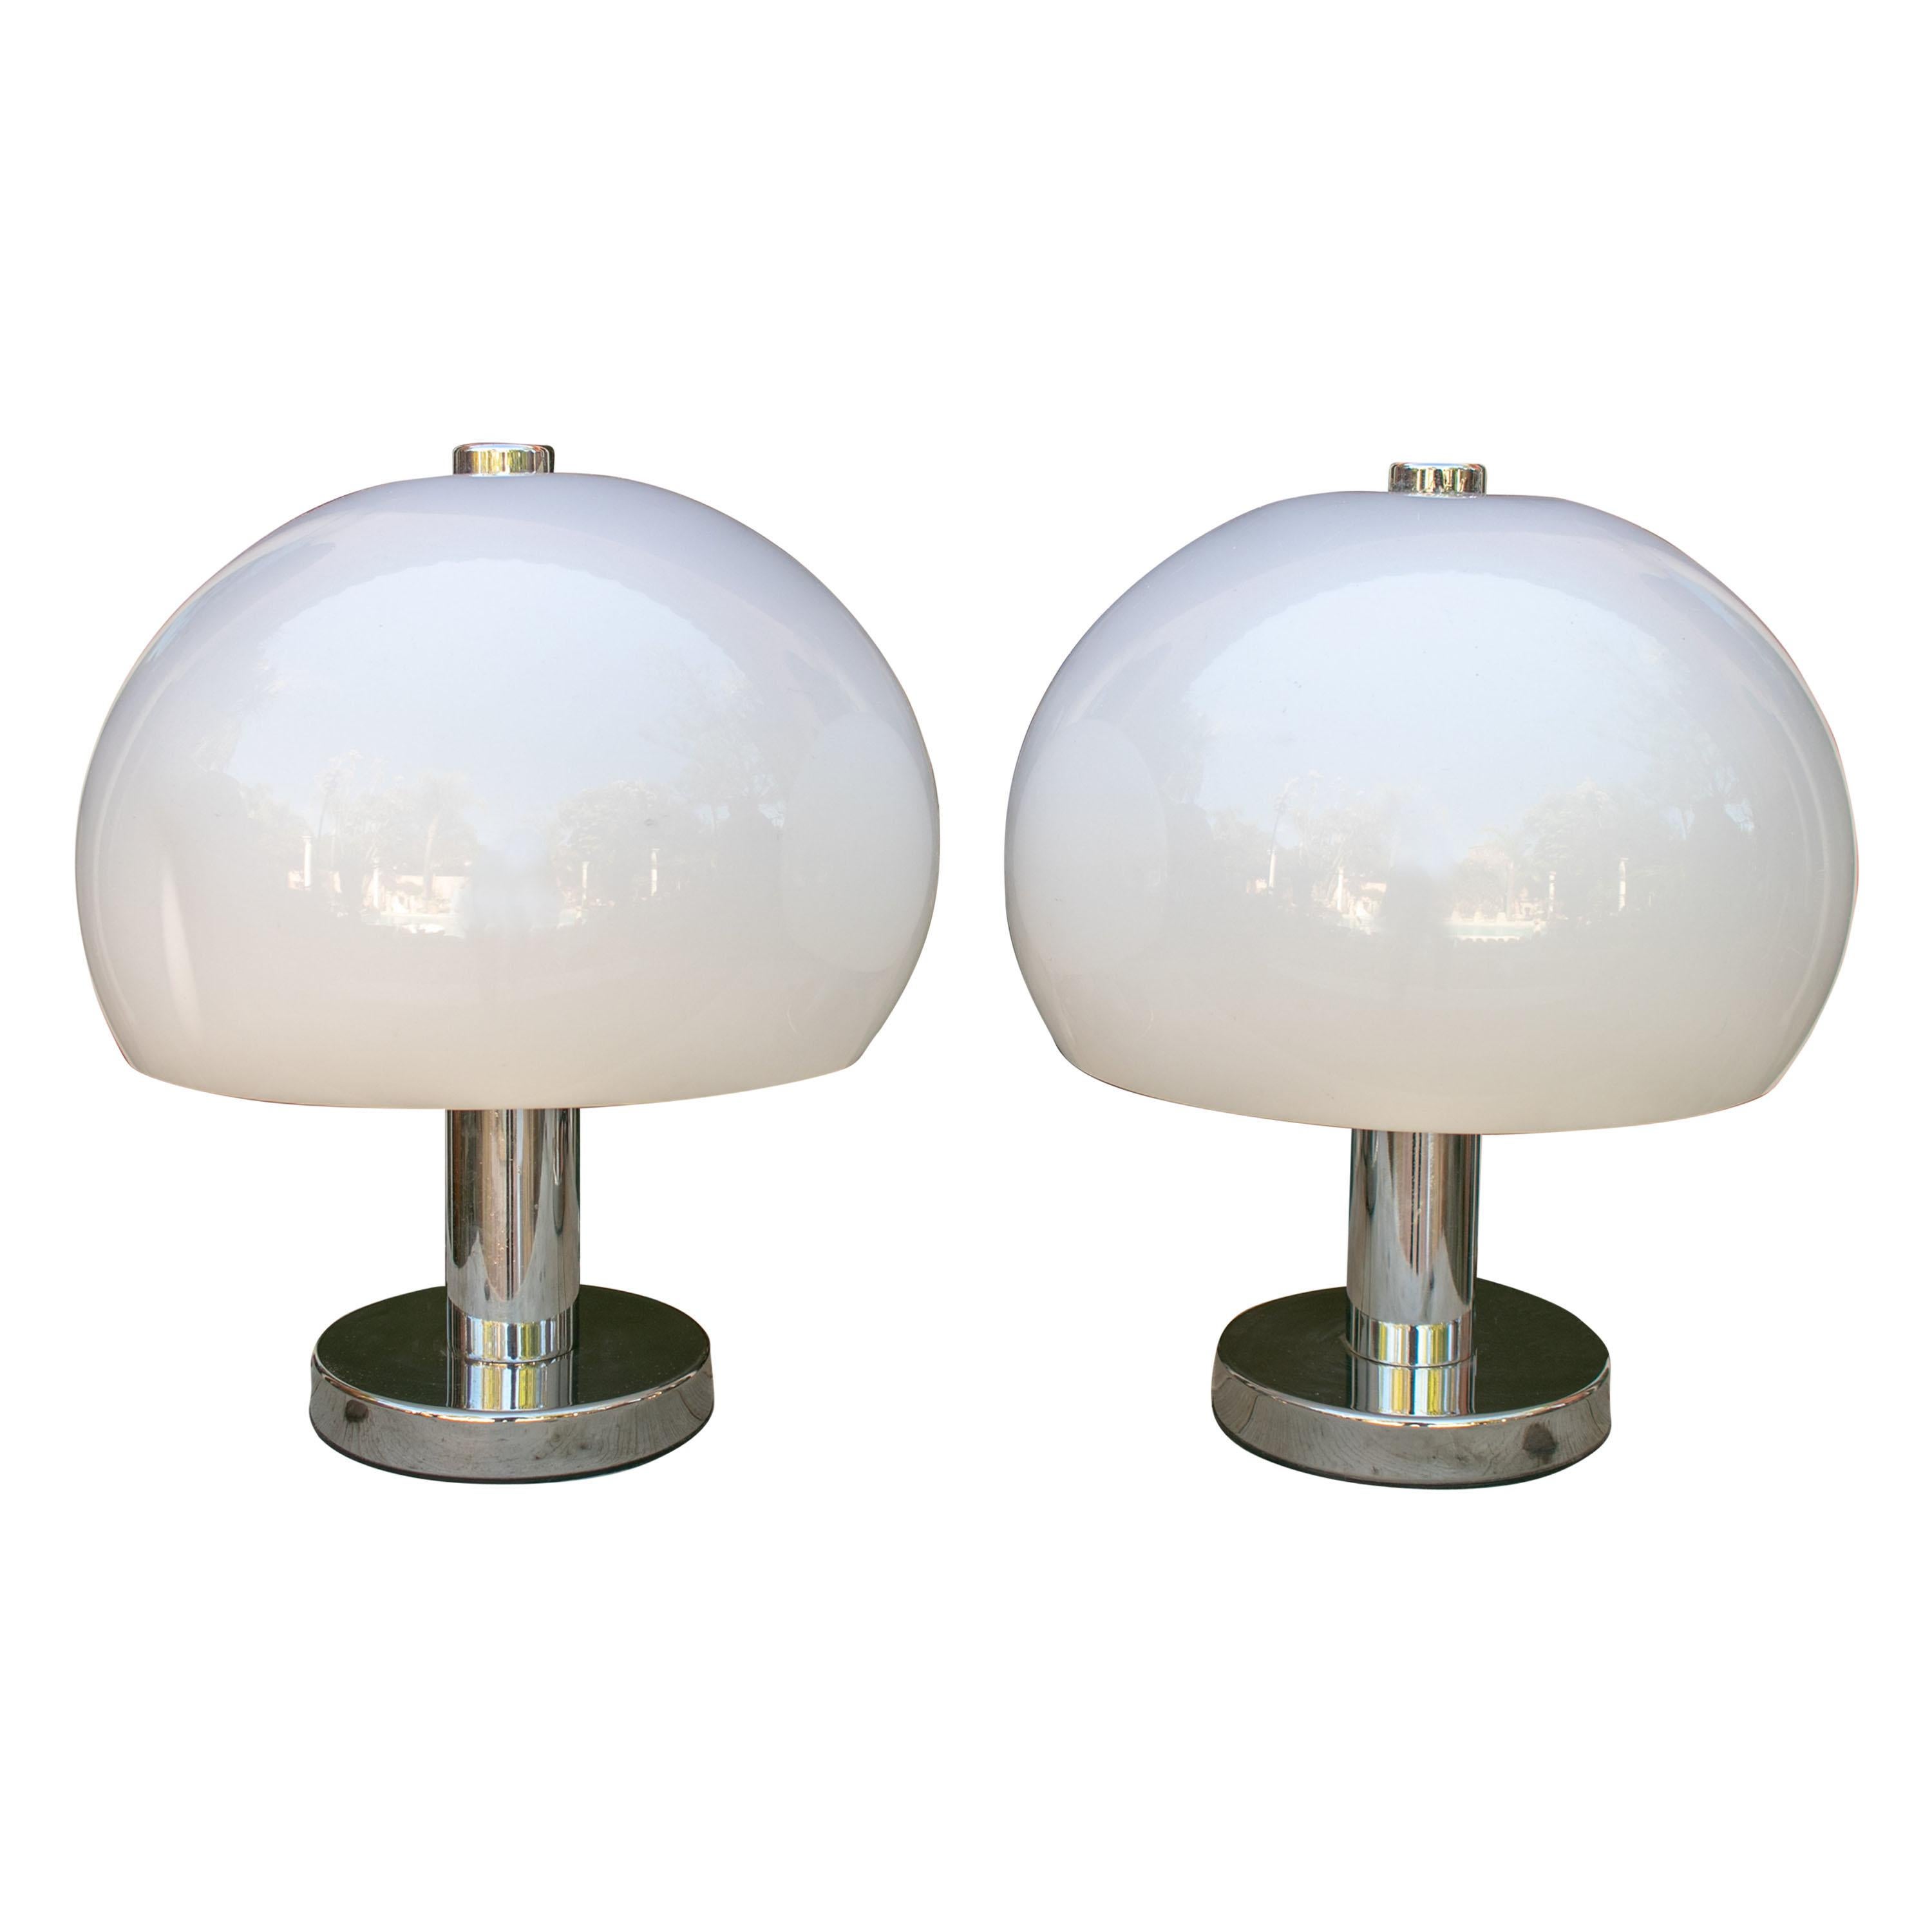 1980s English Pair of Metal Table Lamps with White Lamp Shade